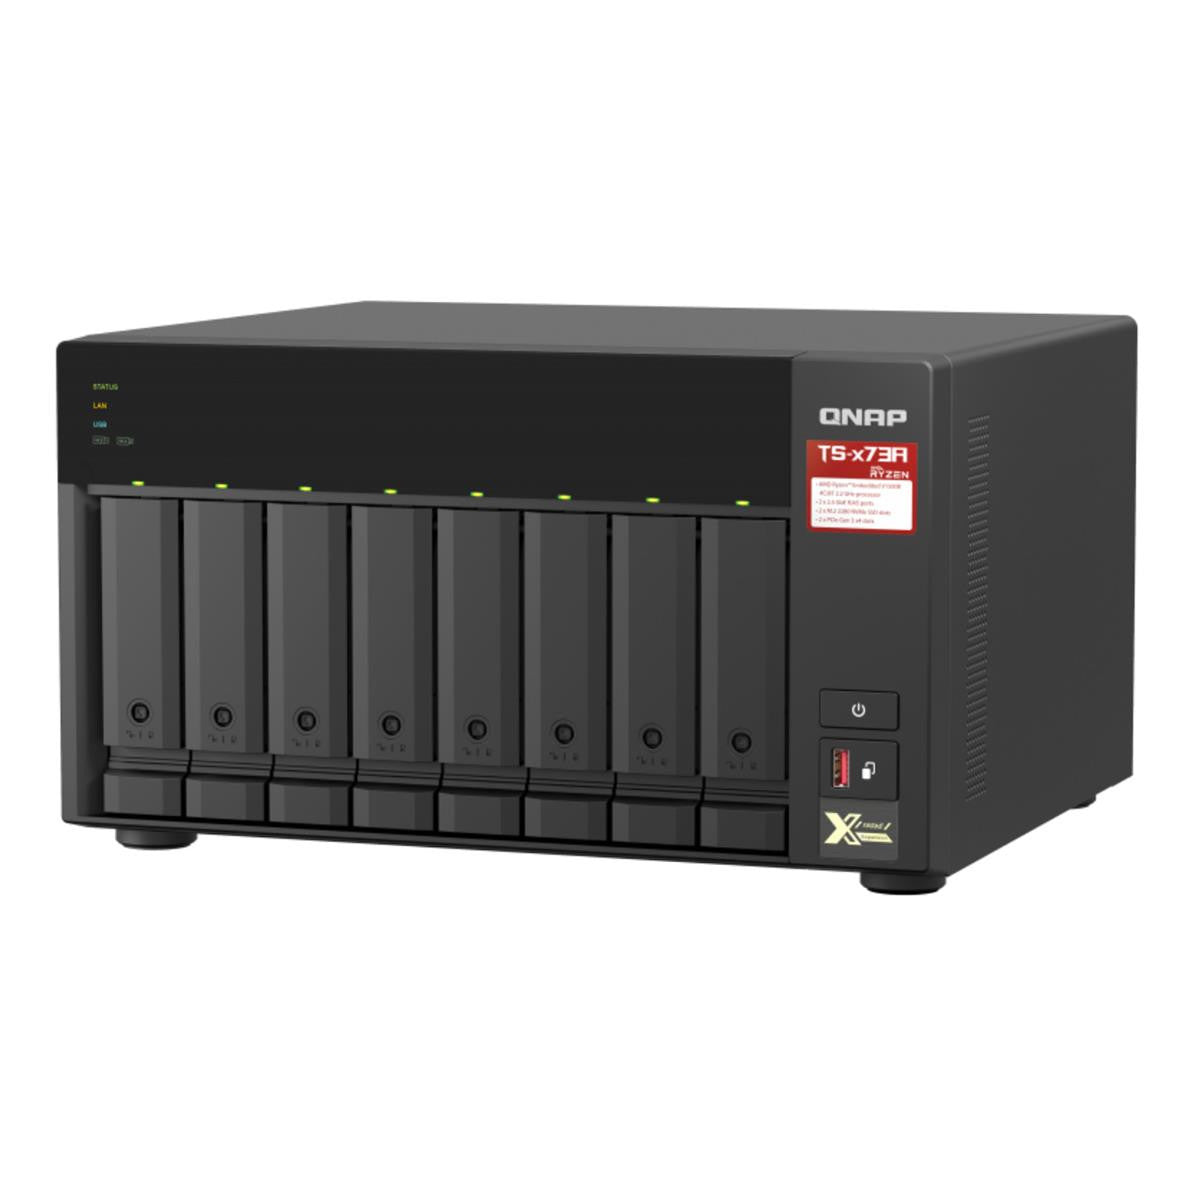 QNAP TS-873A 8-BAY NAS with 64GB DDR4 RAM and 96TB (8x12TB) Seagate Ironwolf NAS Drives Fully Assembled and Tested